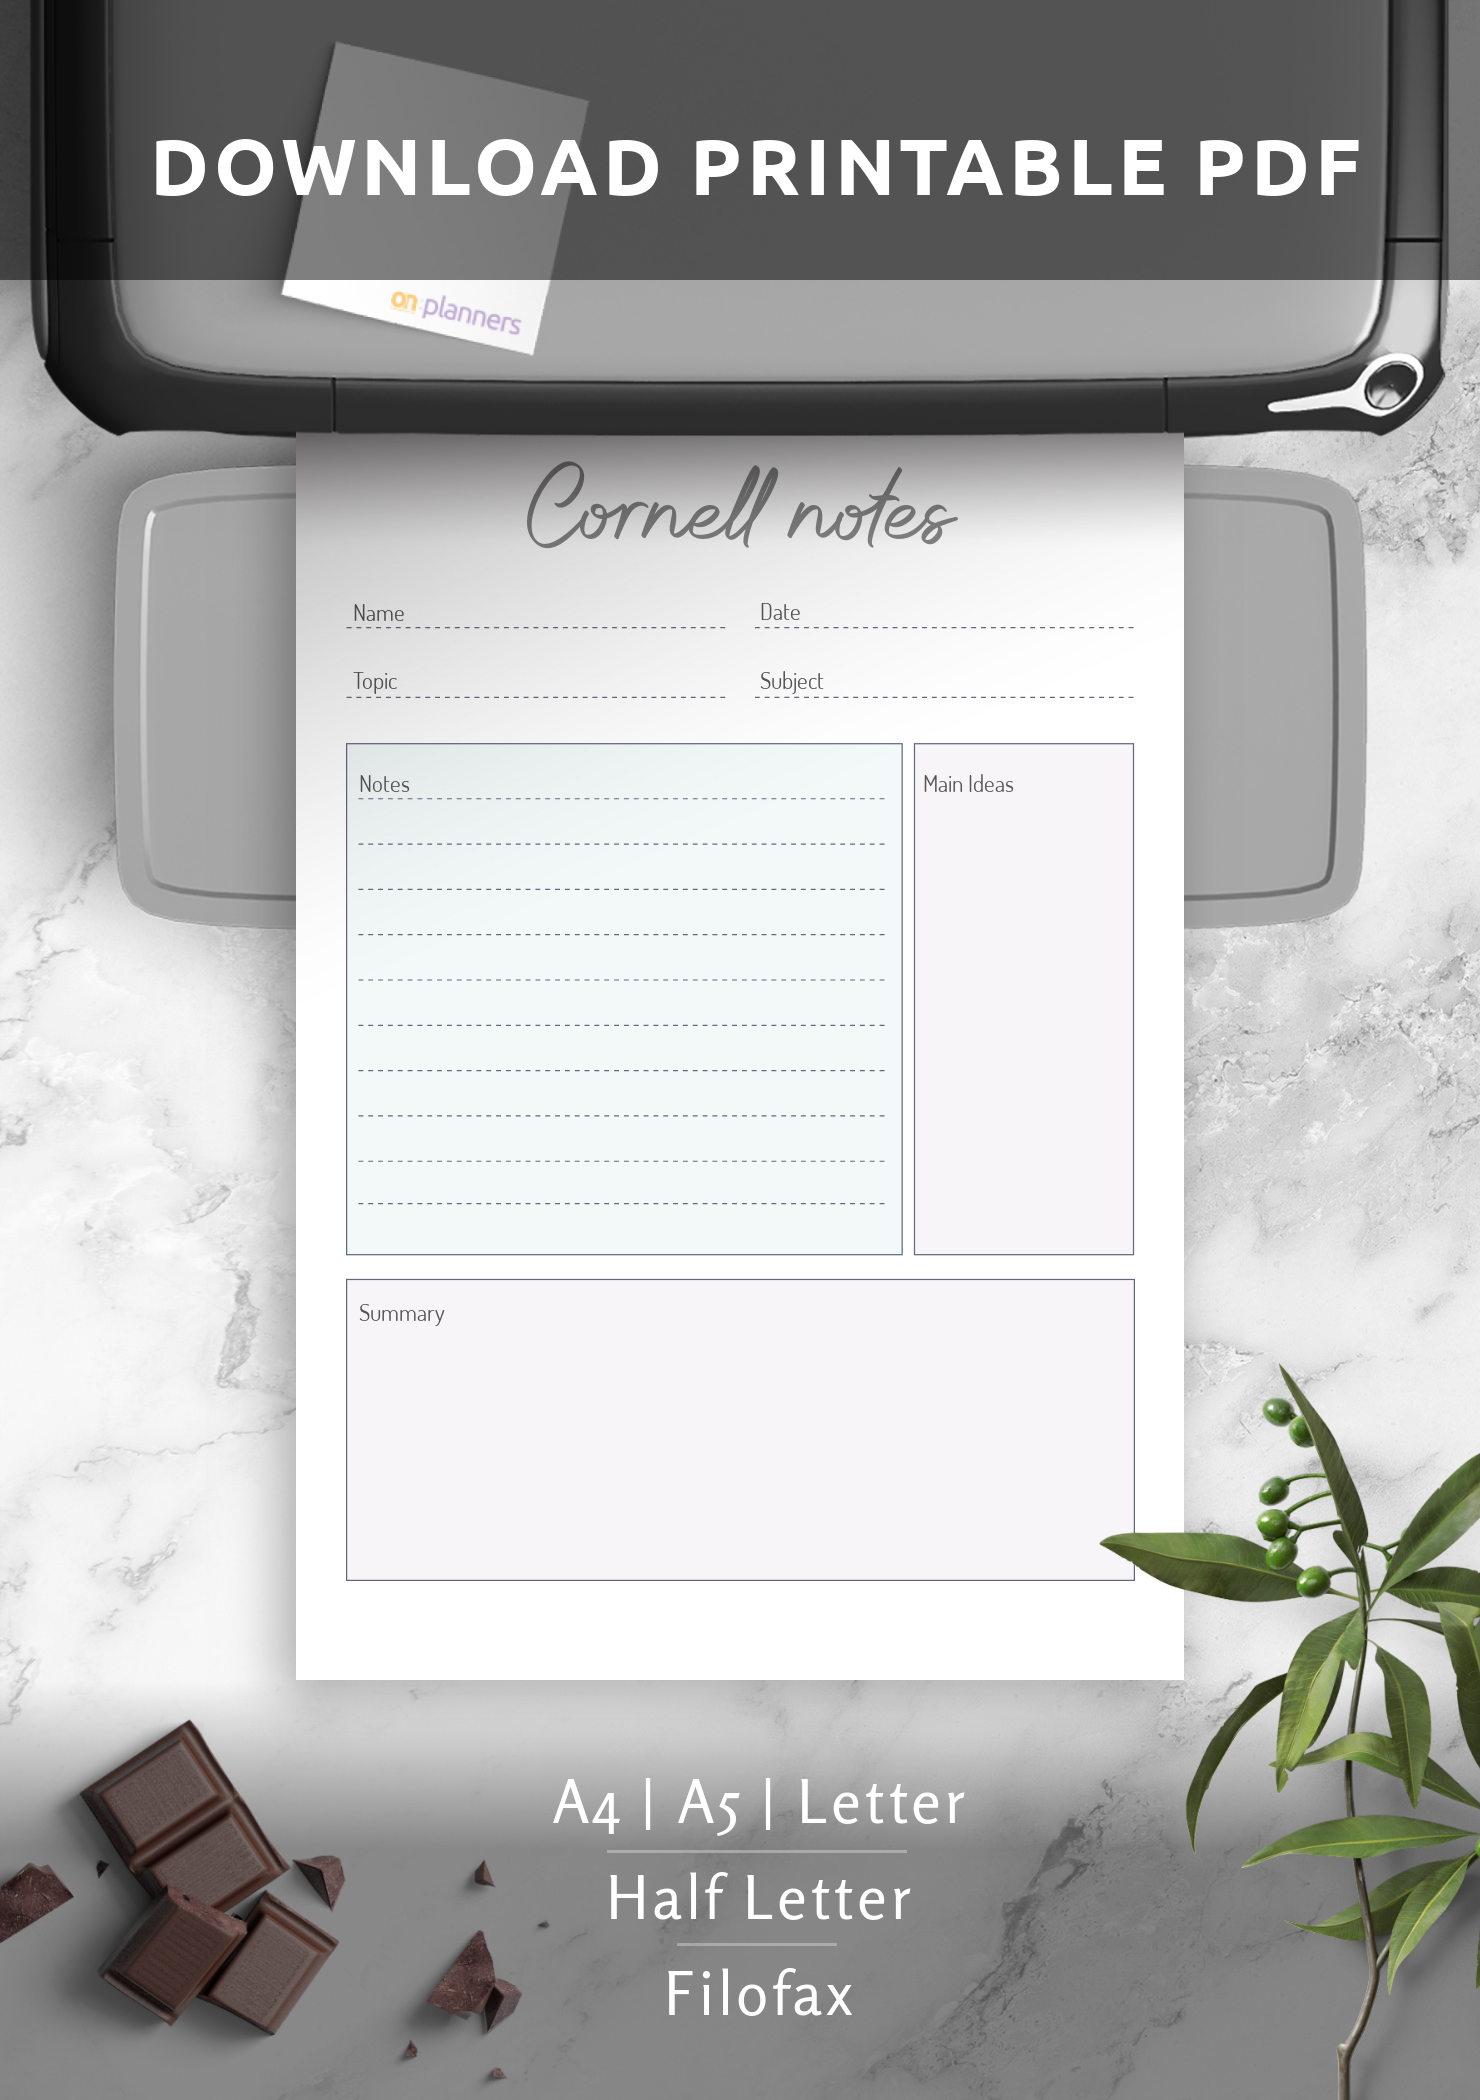 Download Printable Cornell Method Note-Taking Template PDF